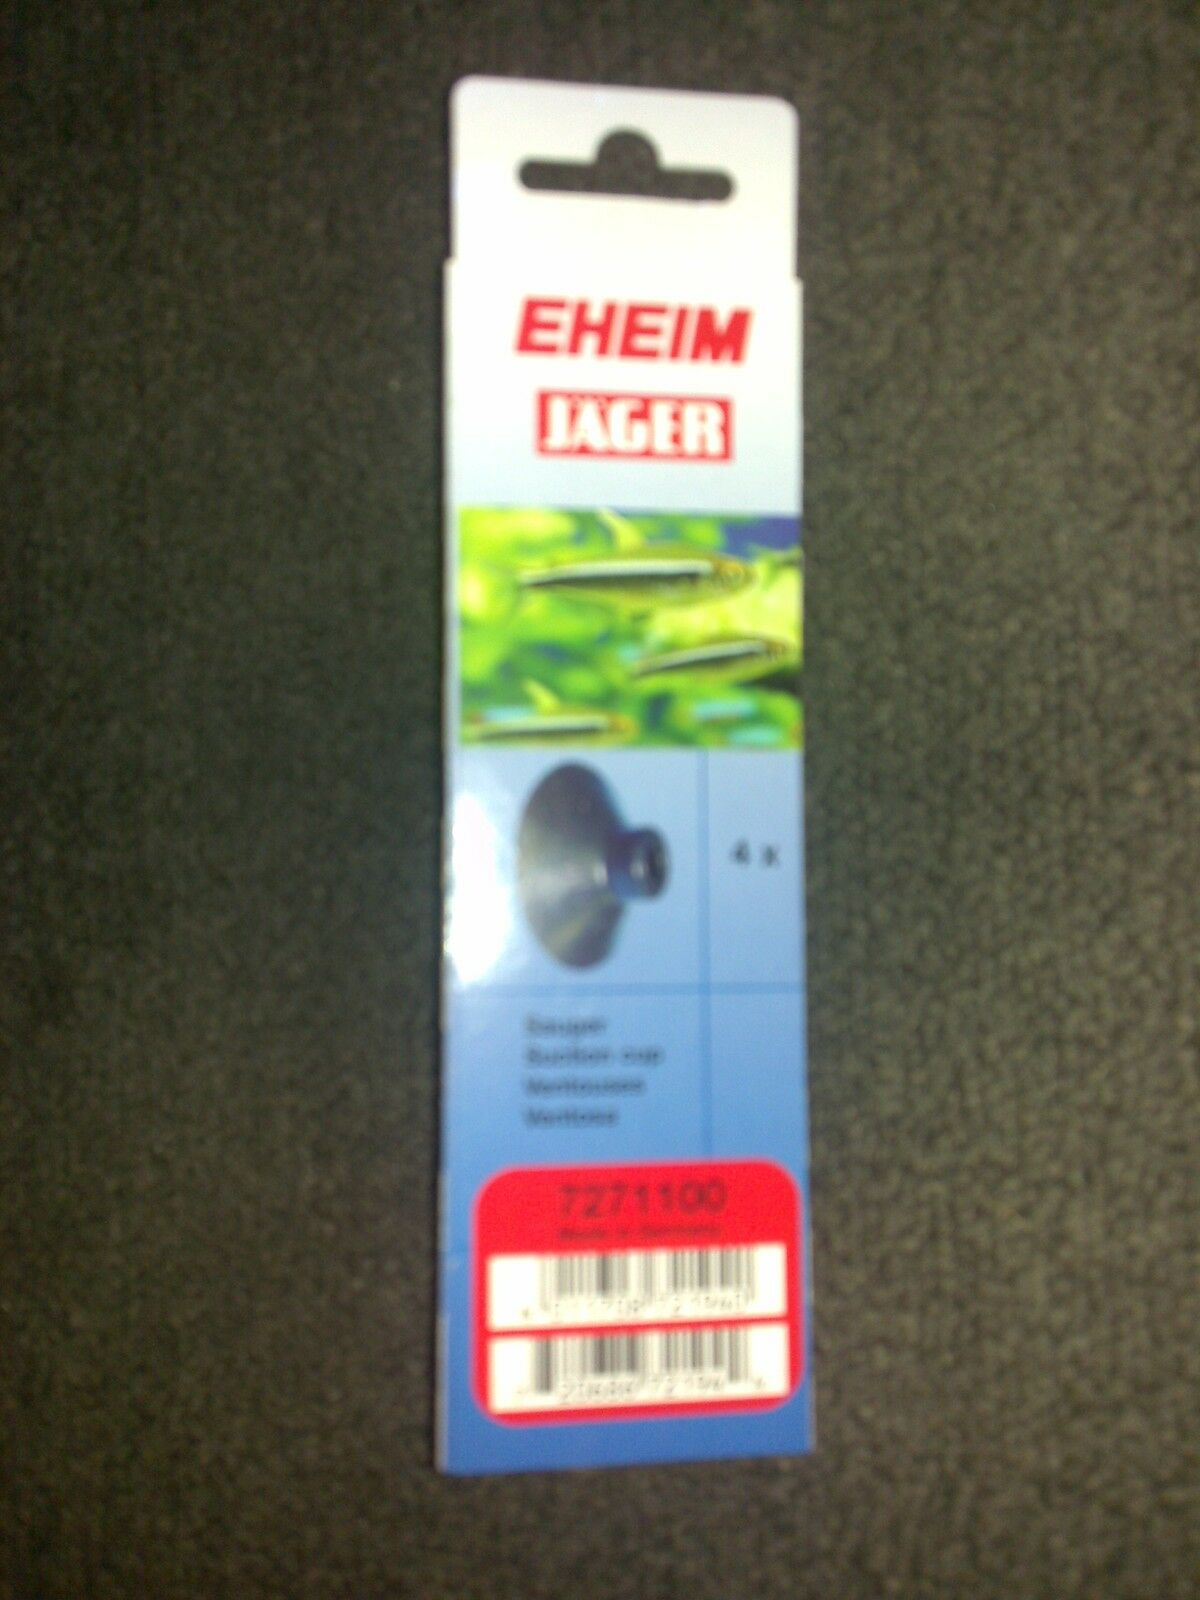 New Eheim suction cups 7271100 to suit most Eheim filters, pumps &amp; heaters